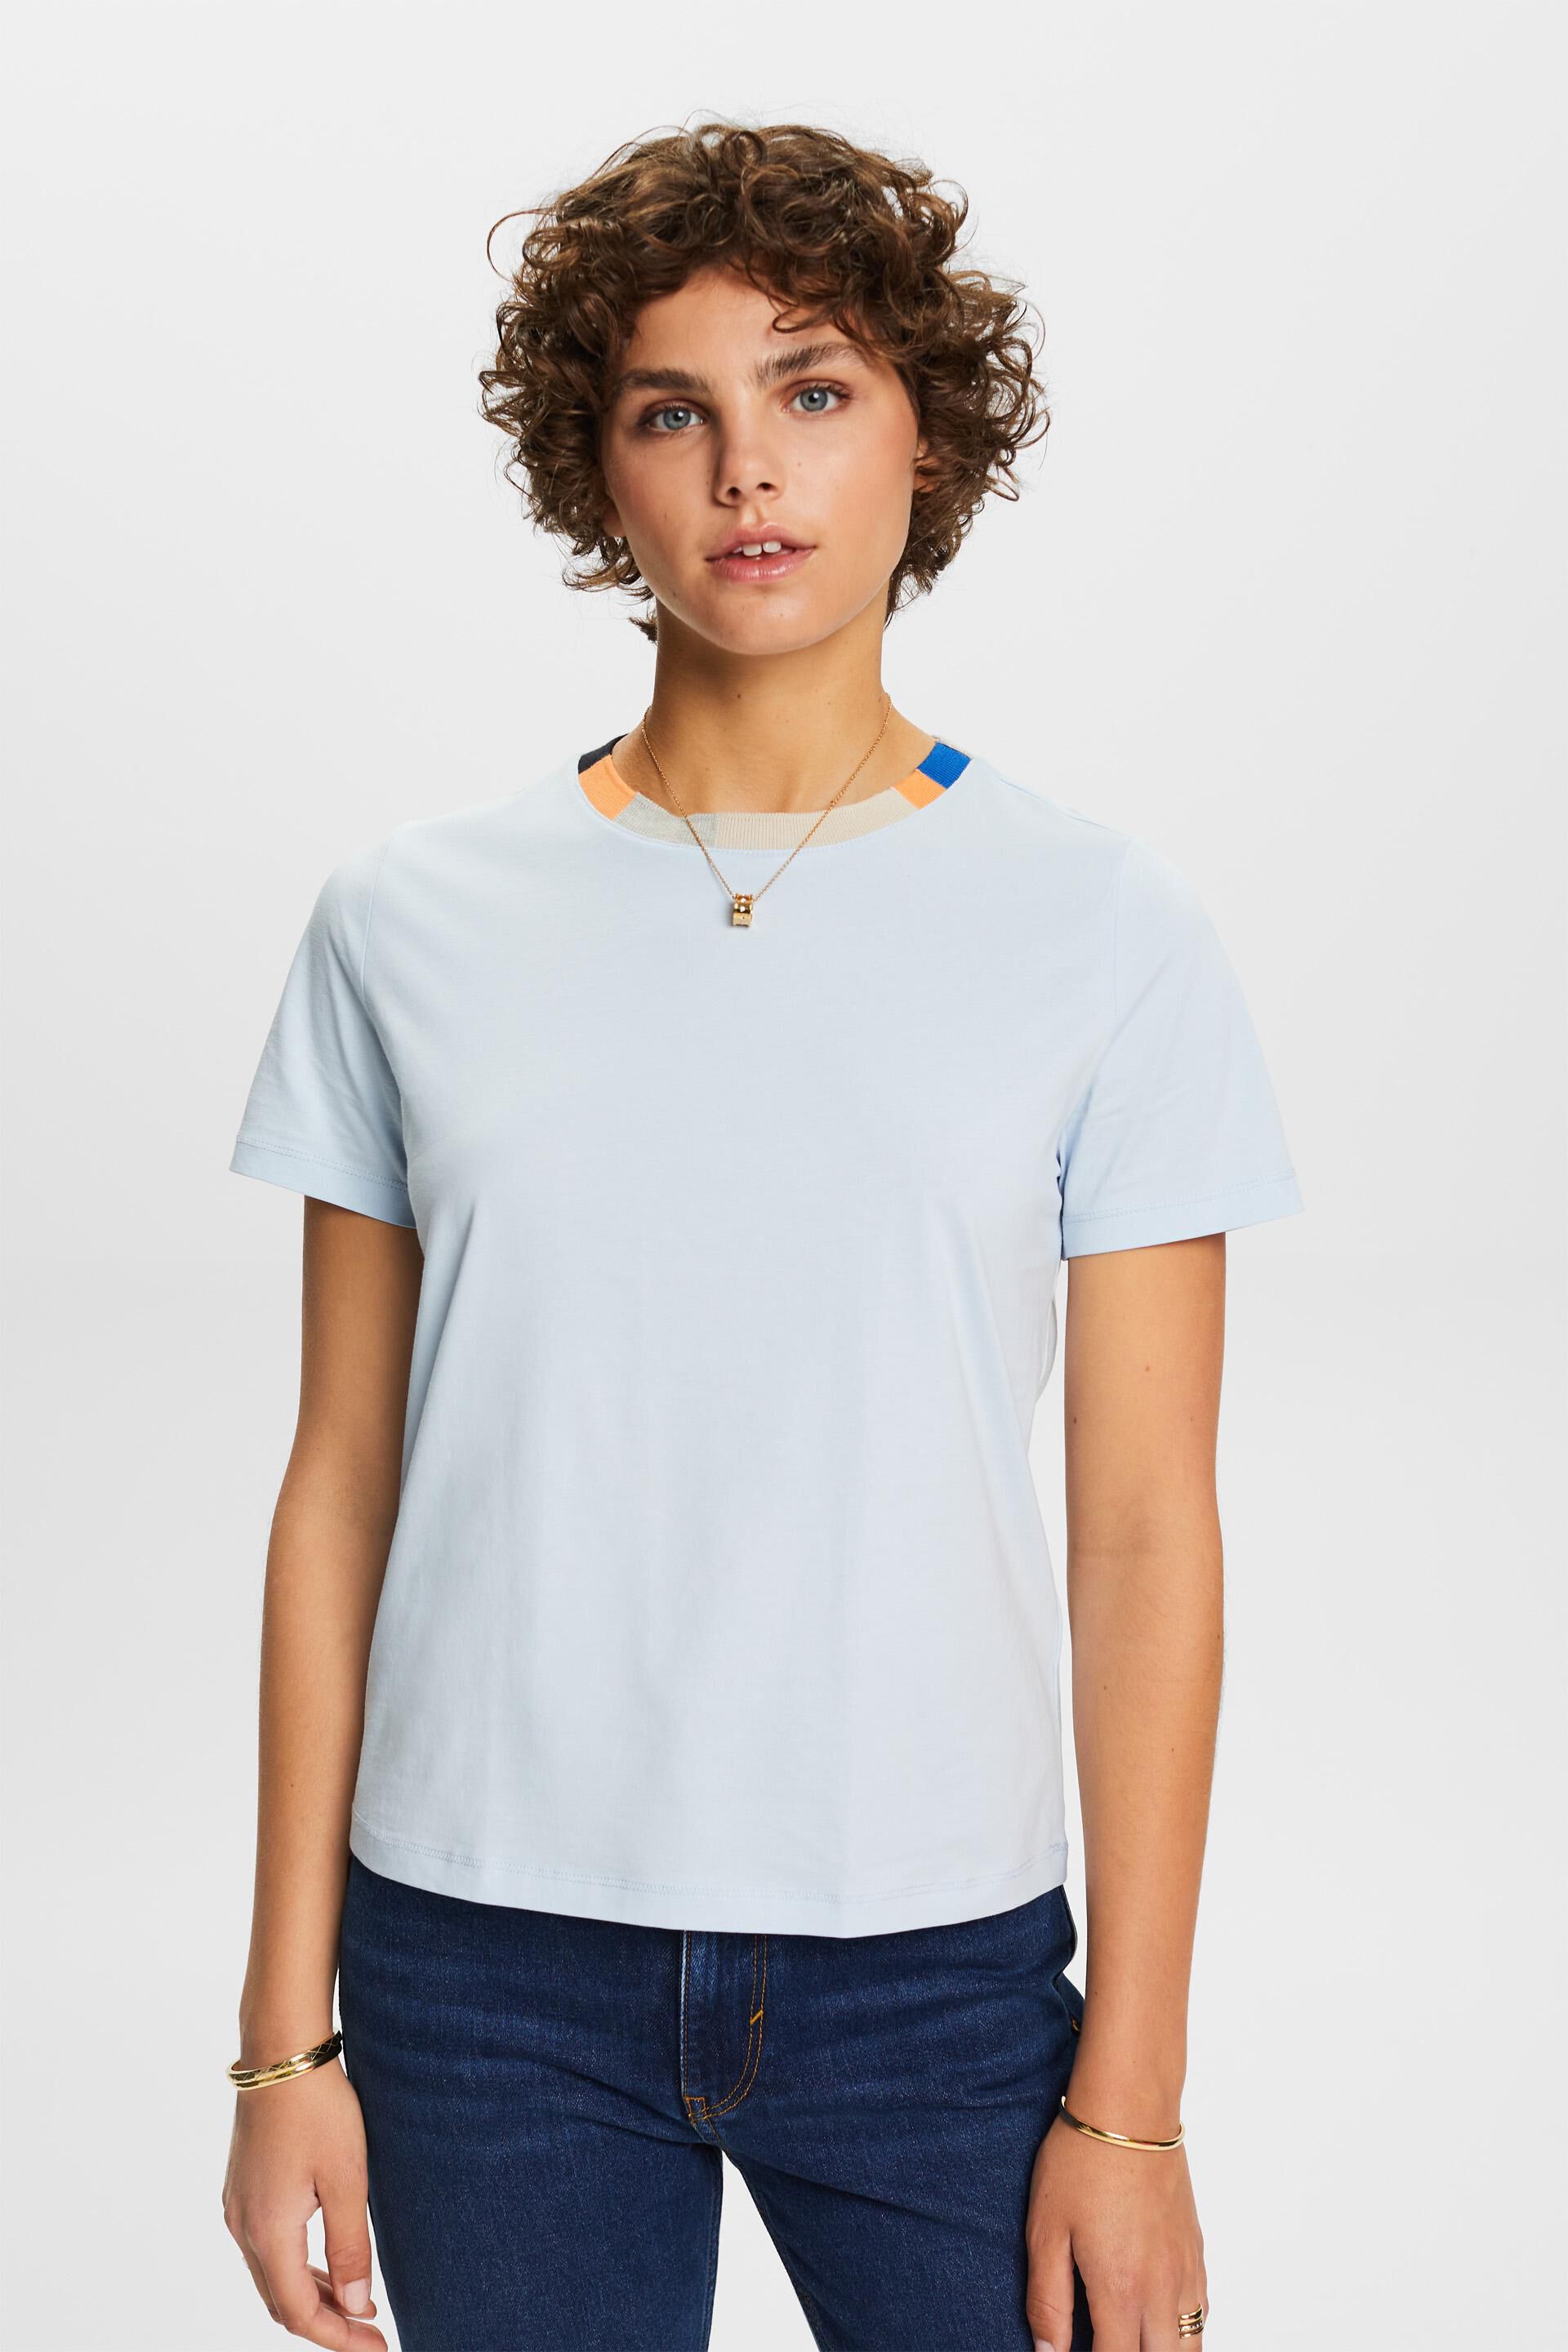 Shop the Latest in Women's Fashion T-shirts, Cropped T-shirt